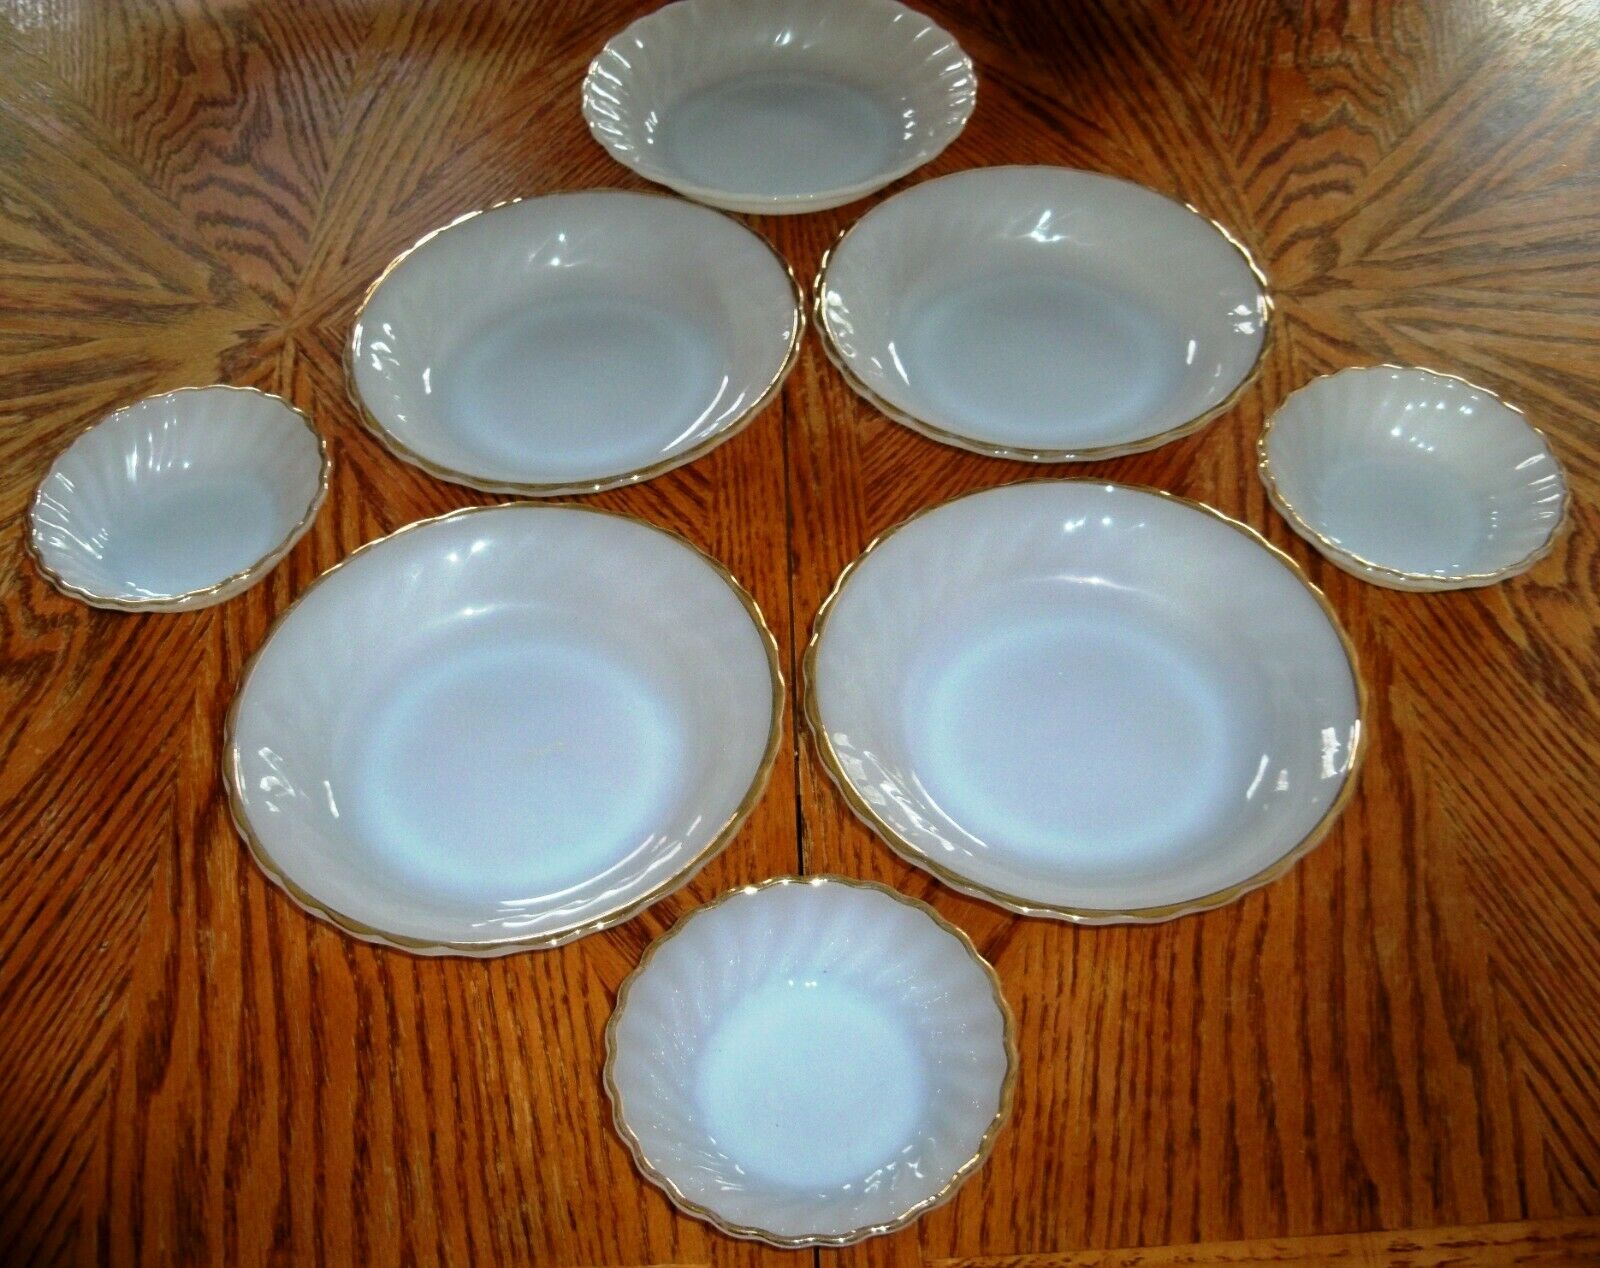 8 Piece Anchor Hocking Milk Glass Plate / Bowl Lot - Assorted Pieces As Pictured